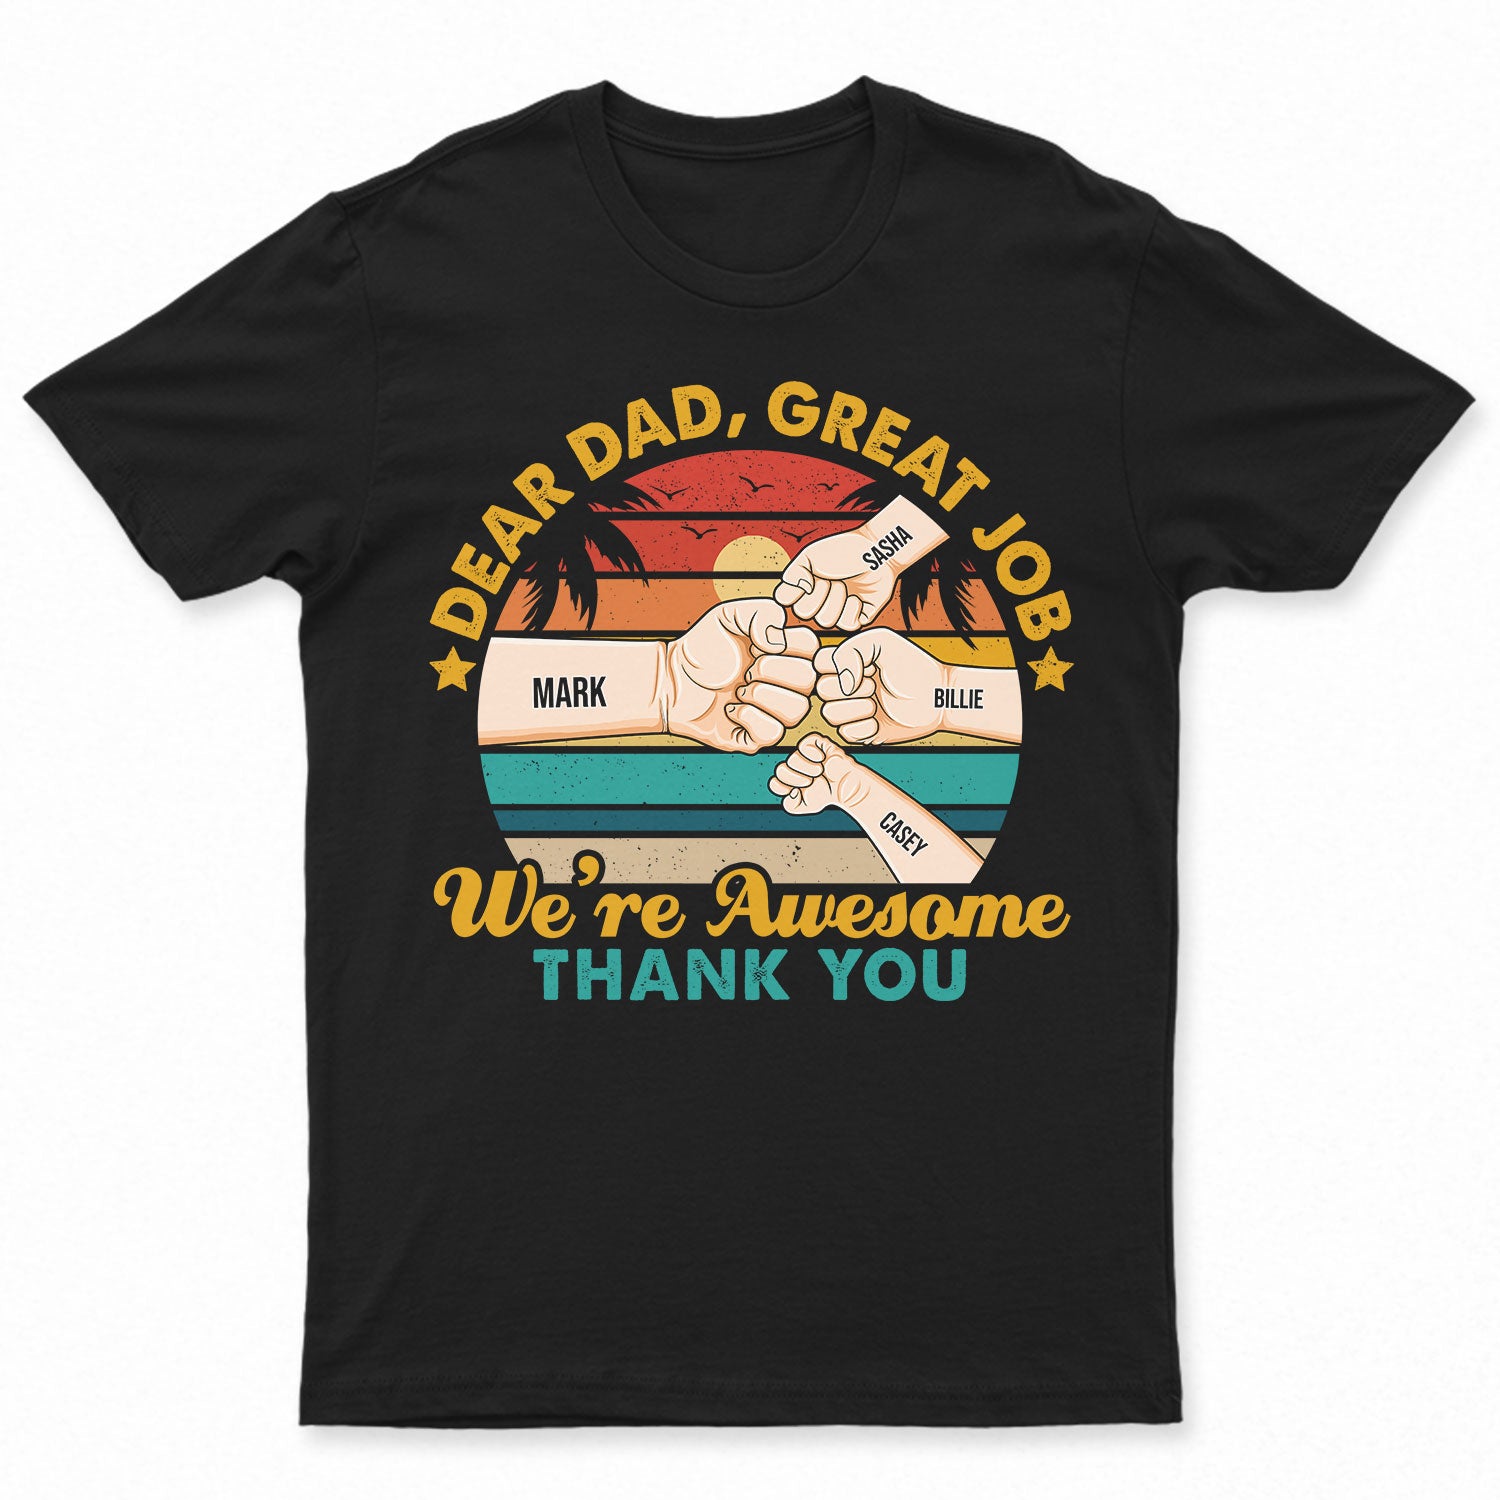 Dear Dad Great Job We're Awesome Thank You Fist - Birthday, Loving Gift For Father, Grandpa, Grandfather - Personalized Custom T Shirt